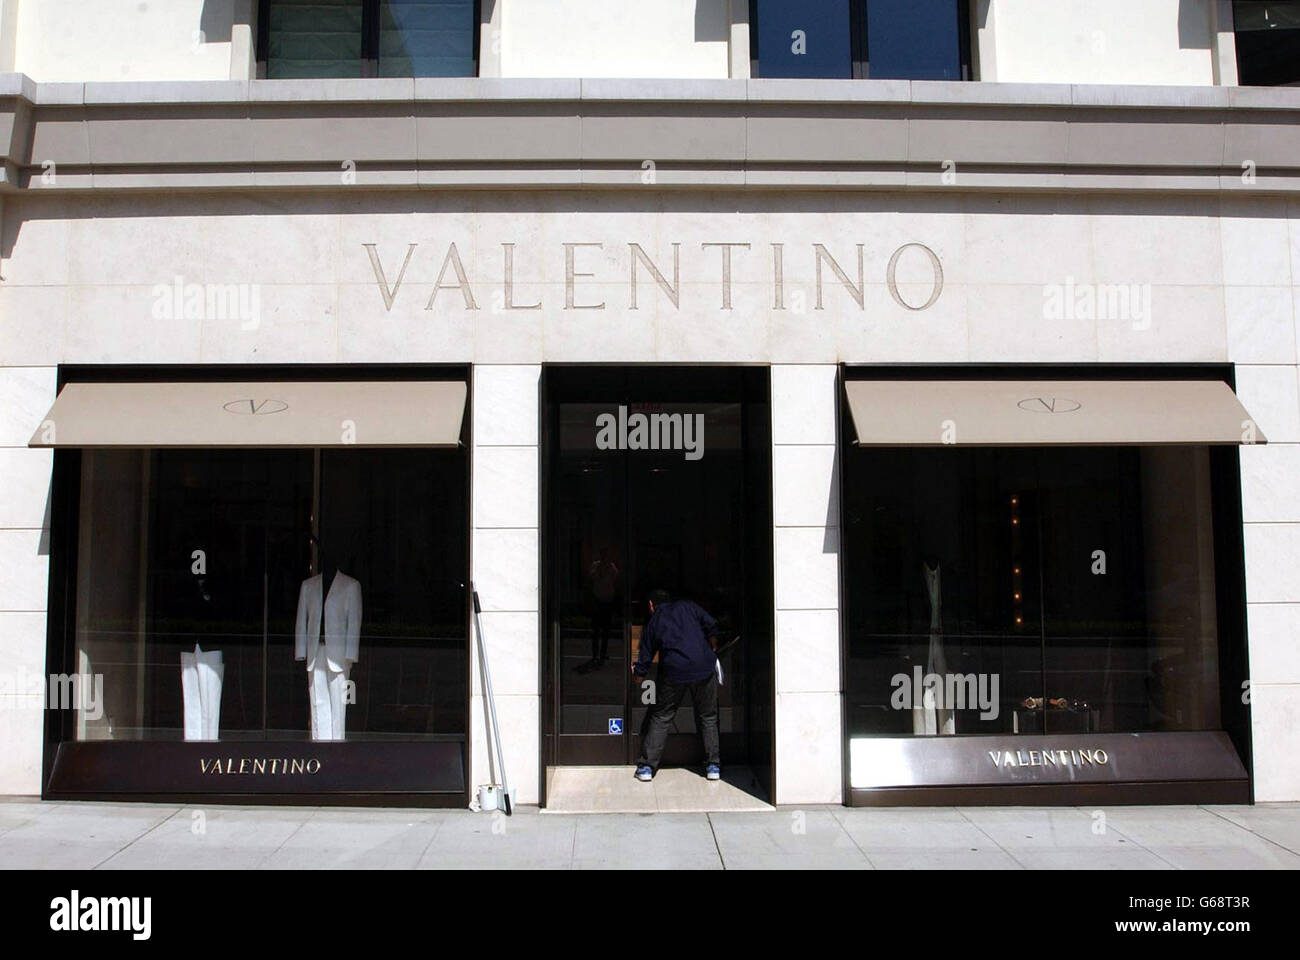 Valentino Pavilion Kuala Lumpur: Women and men collections, clothing, bags,  shoes and accessories by Valentino Garavani in Kuala Lumpur, .